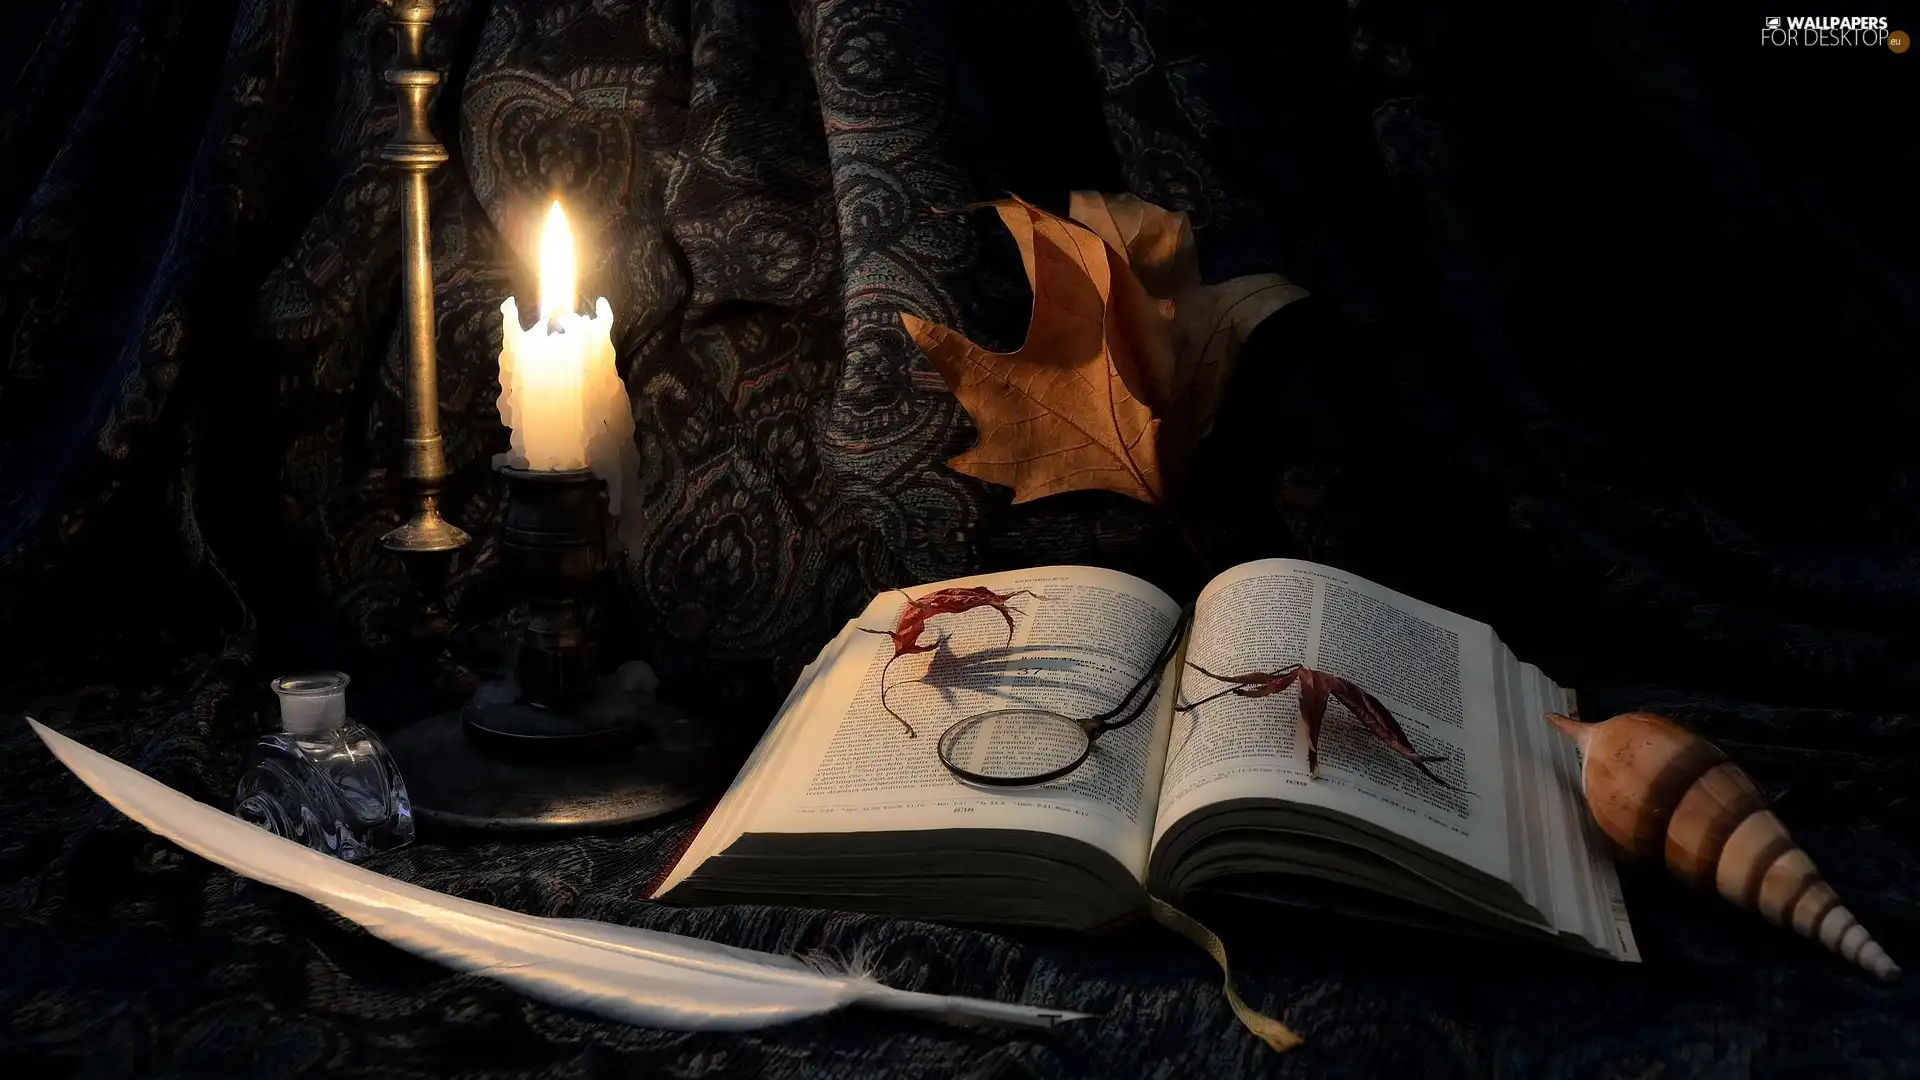 Candle, composition, shell, Leaf, pen, Book